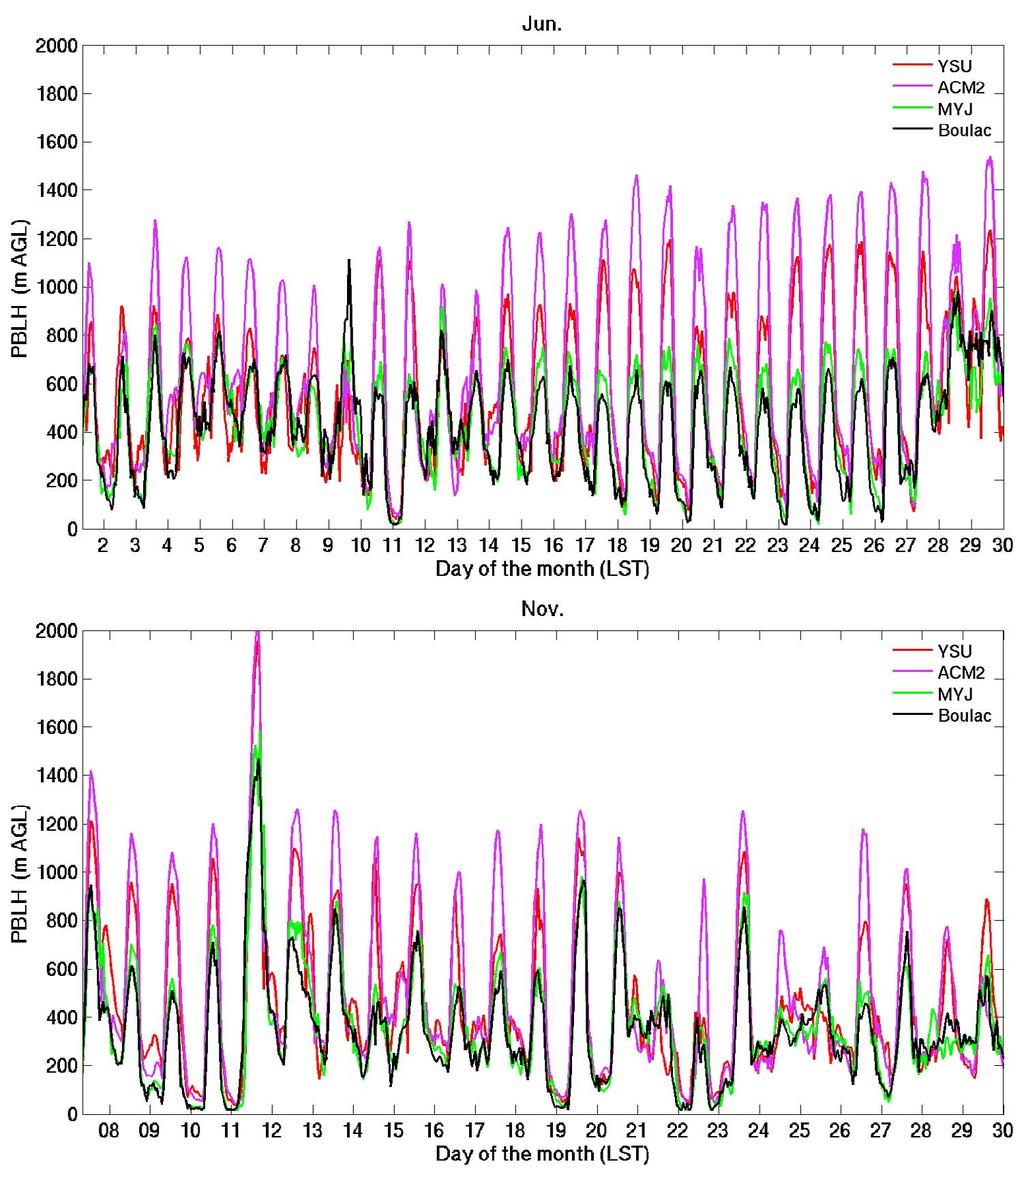 Figure 28. Mean time series of PBL height over 23 sites in Jun and Nov 2006.